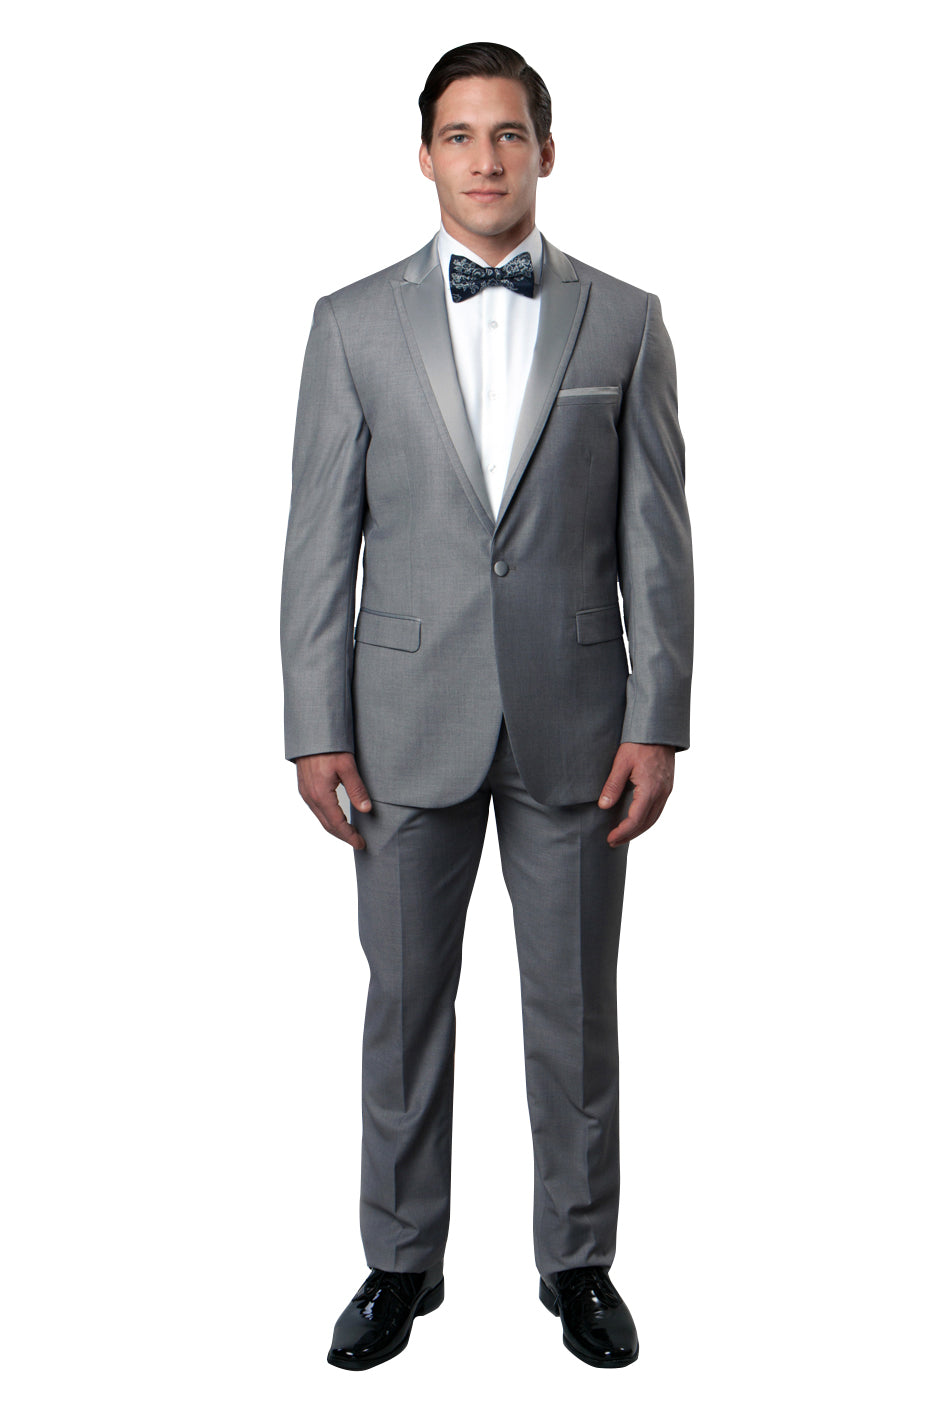 Silver on Silver  Slim Fit Prom Tuxedos - 2 PC